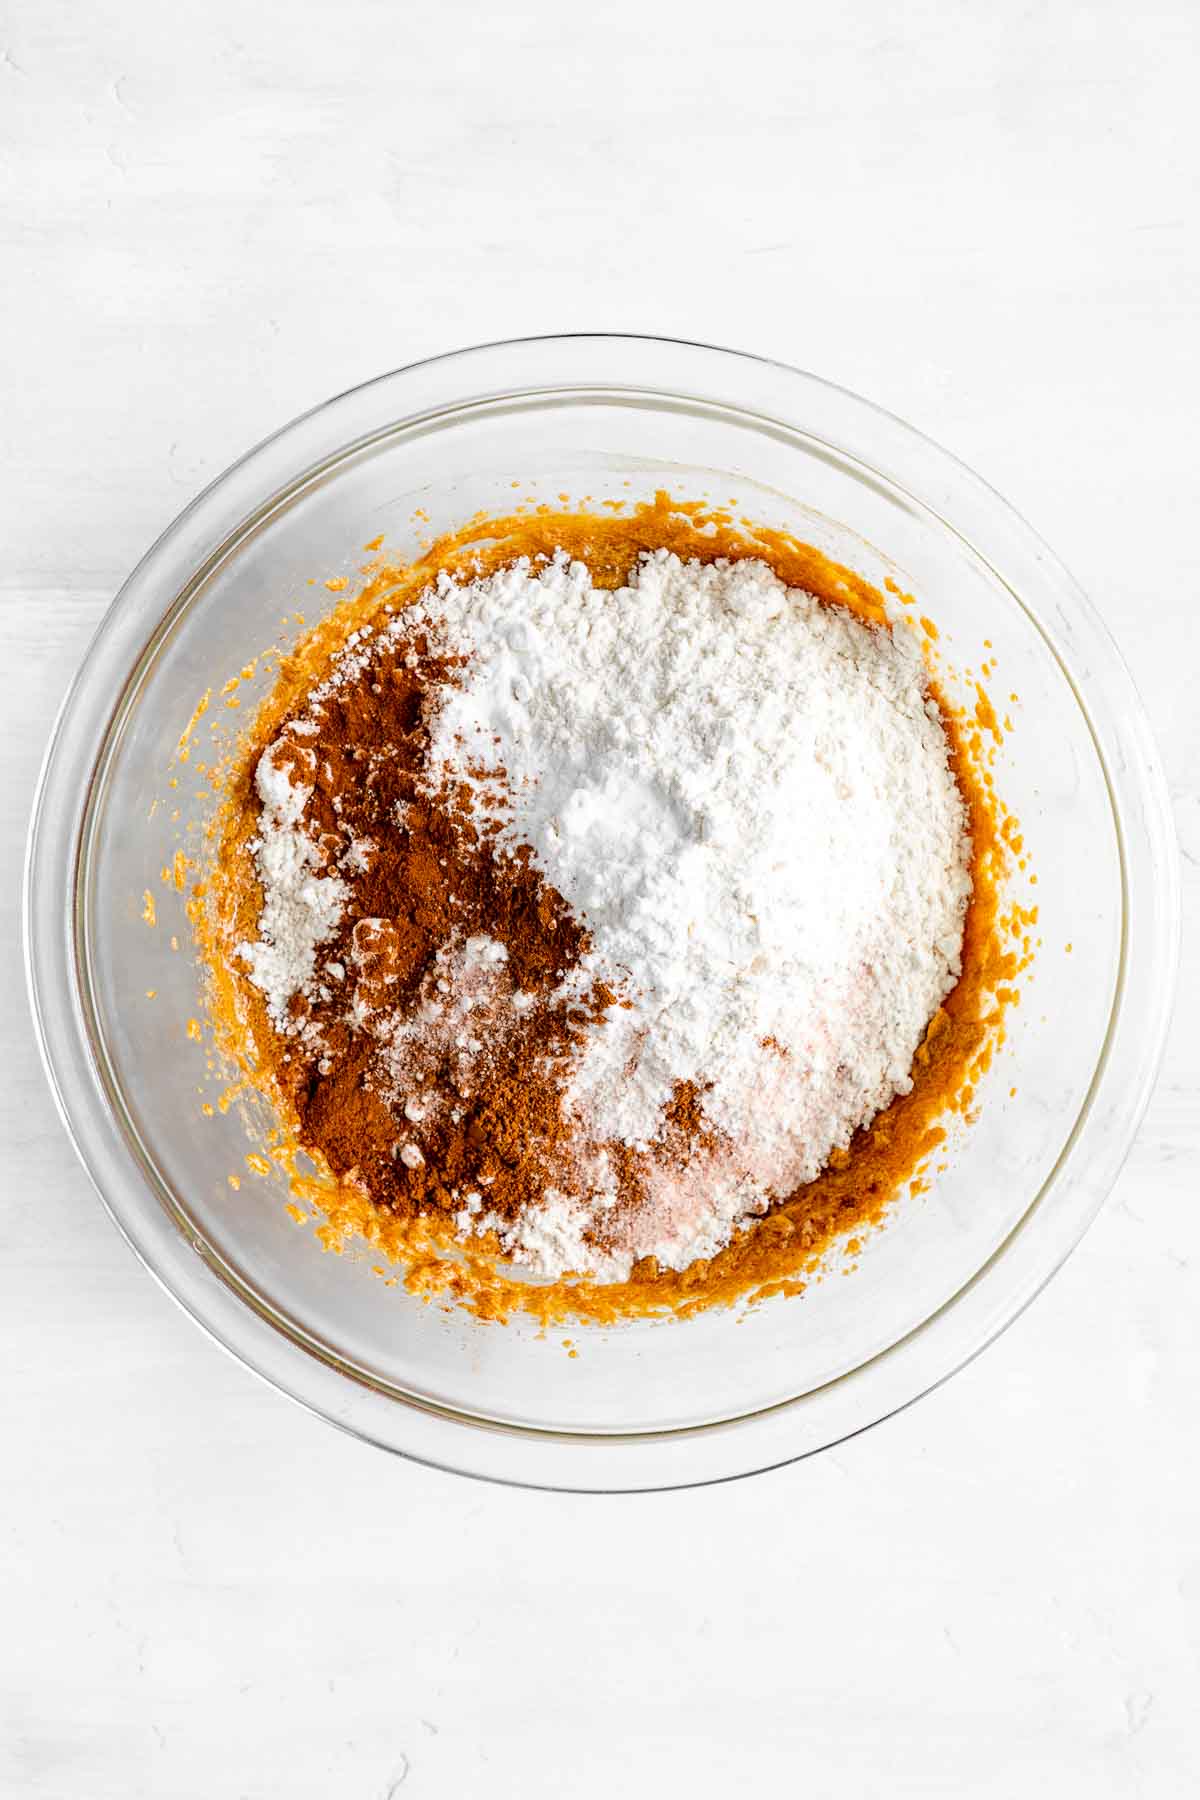 flour, cinnamon, pumpkin pie spice, and salt on top of creamed butter and sugar inside a glass bowl